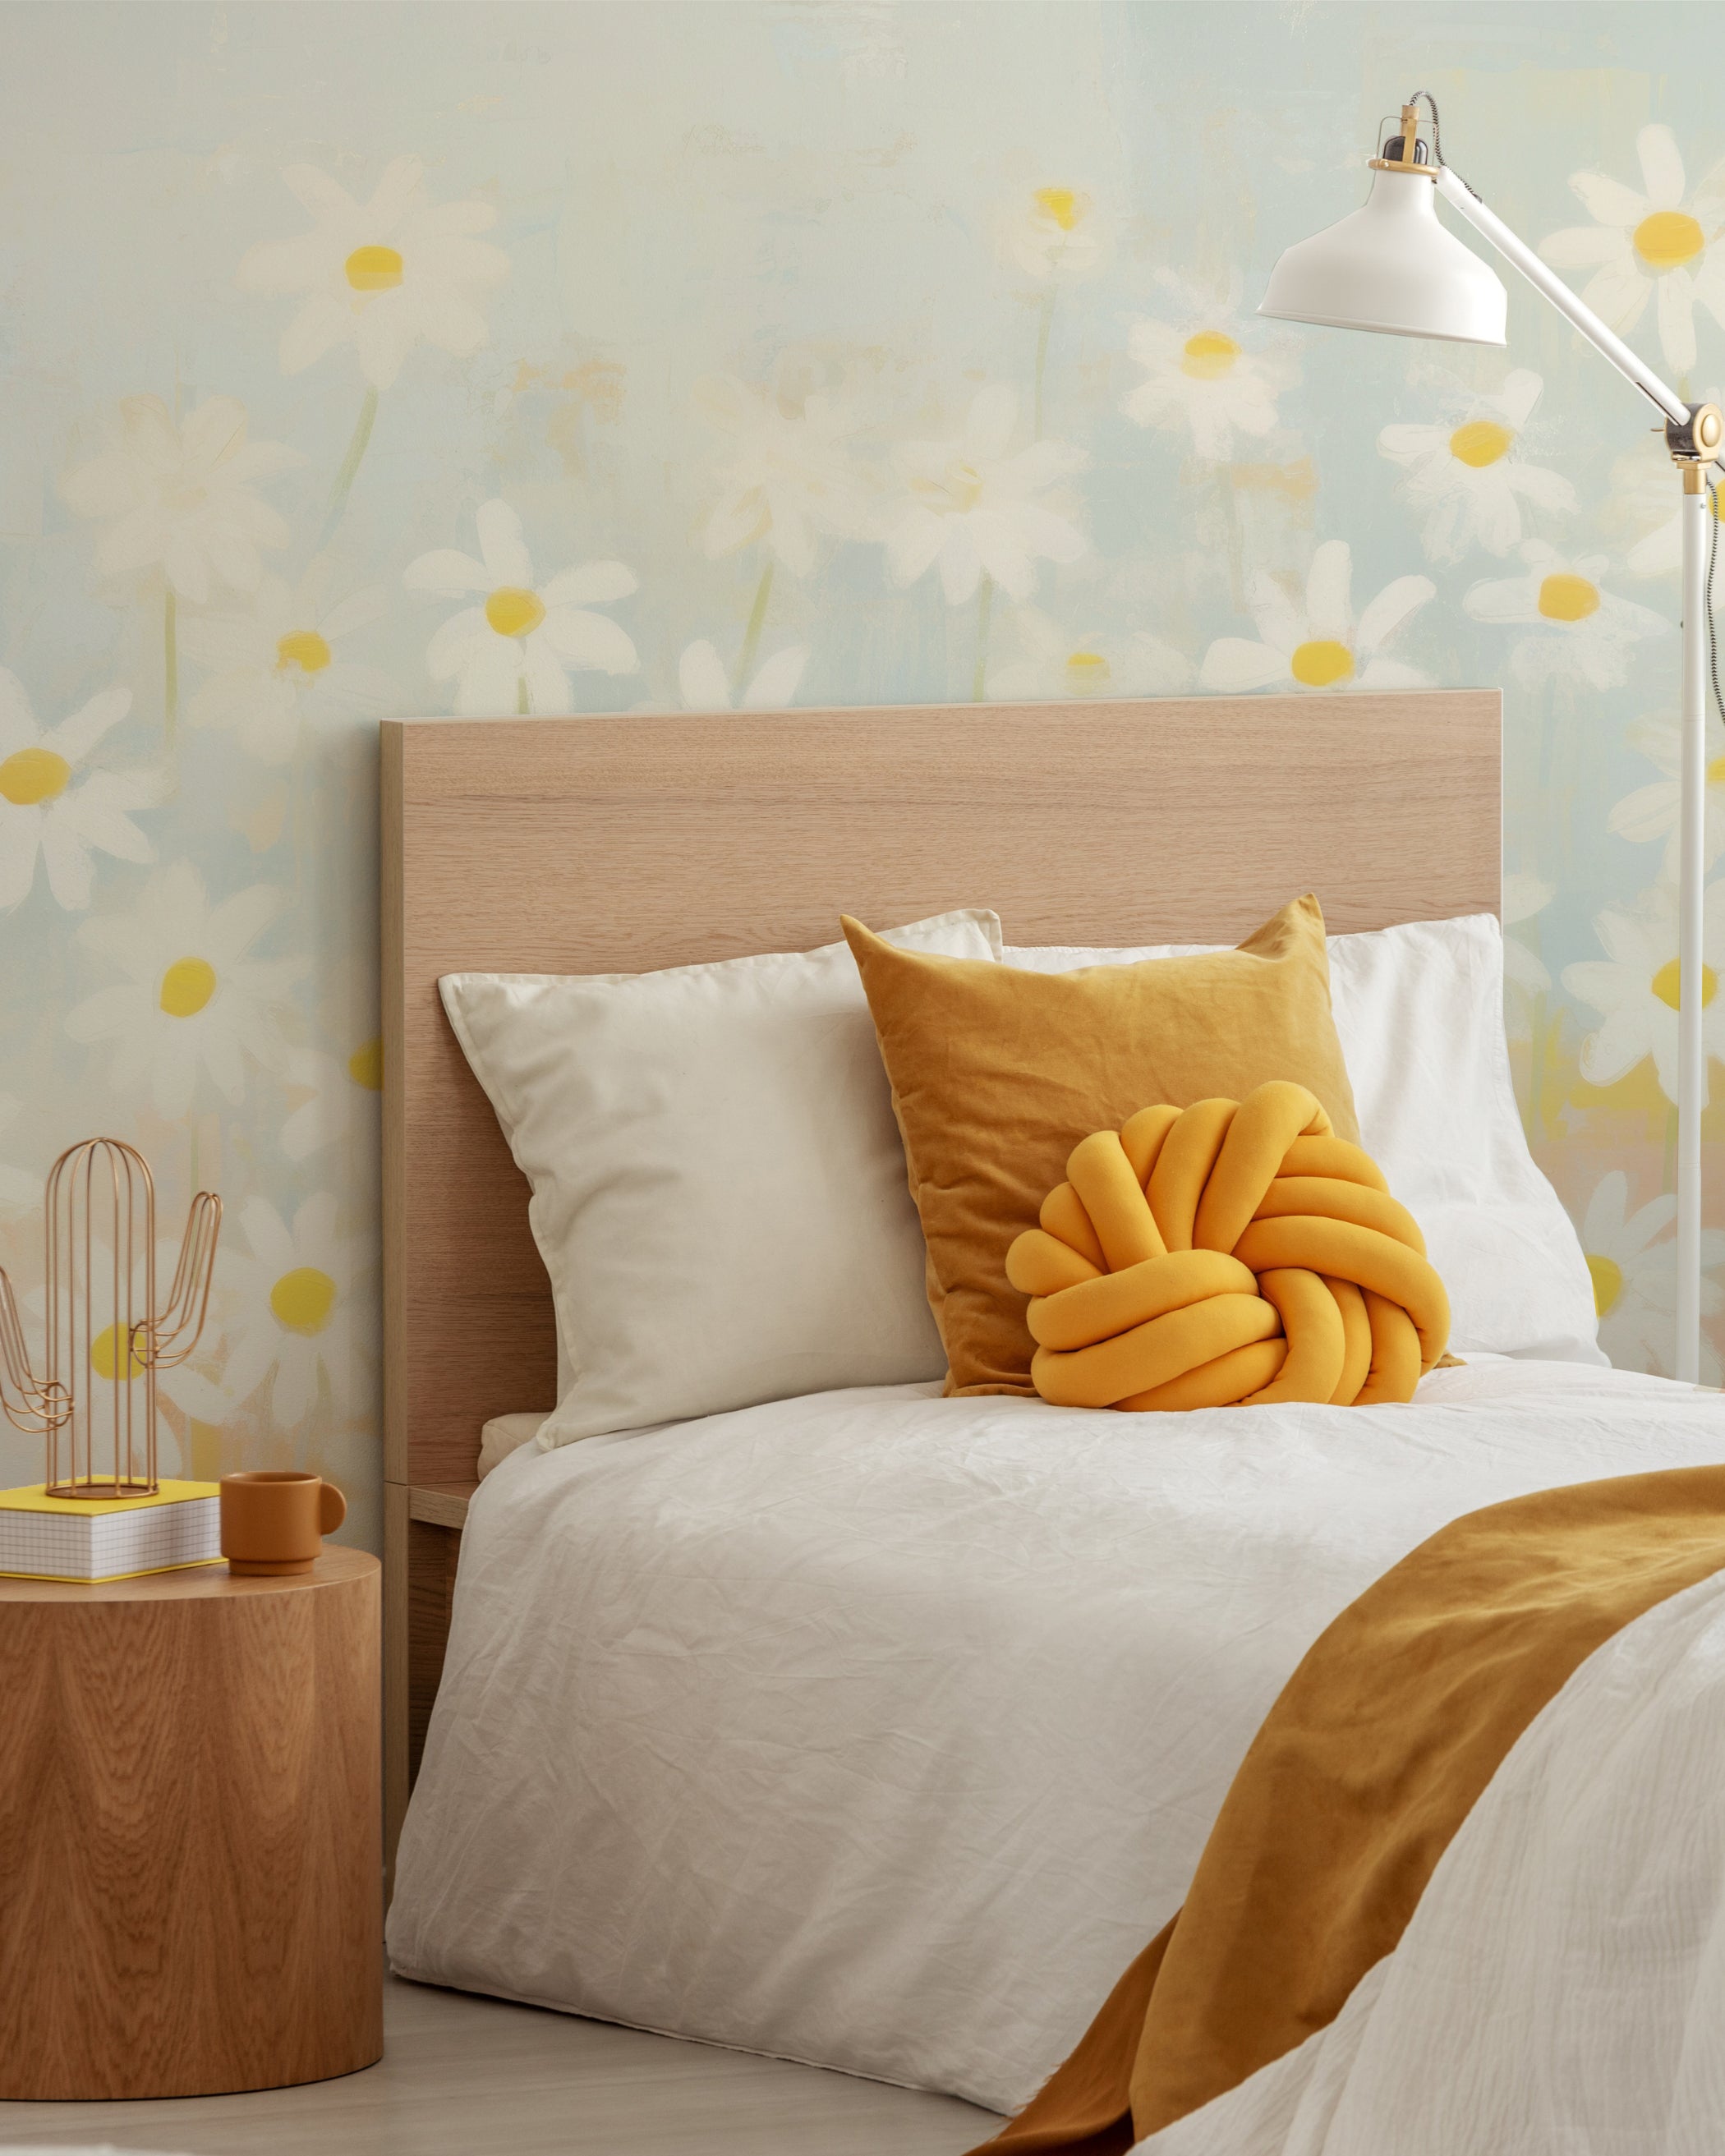 Bedroom decorated with the Spring Daisy Mural, showcasing a bed with white and yellow accents